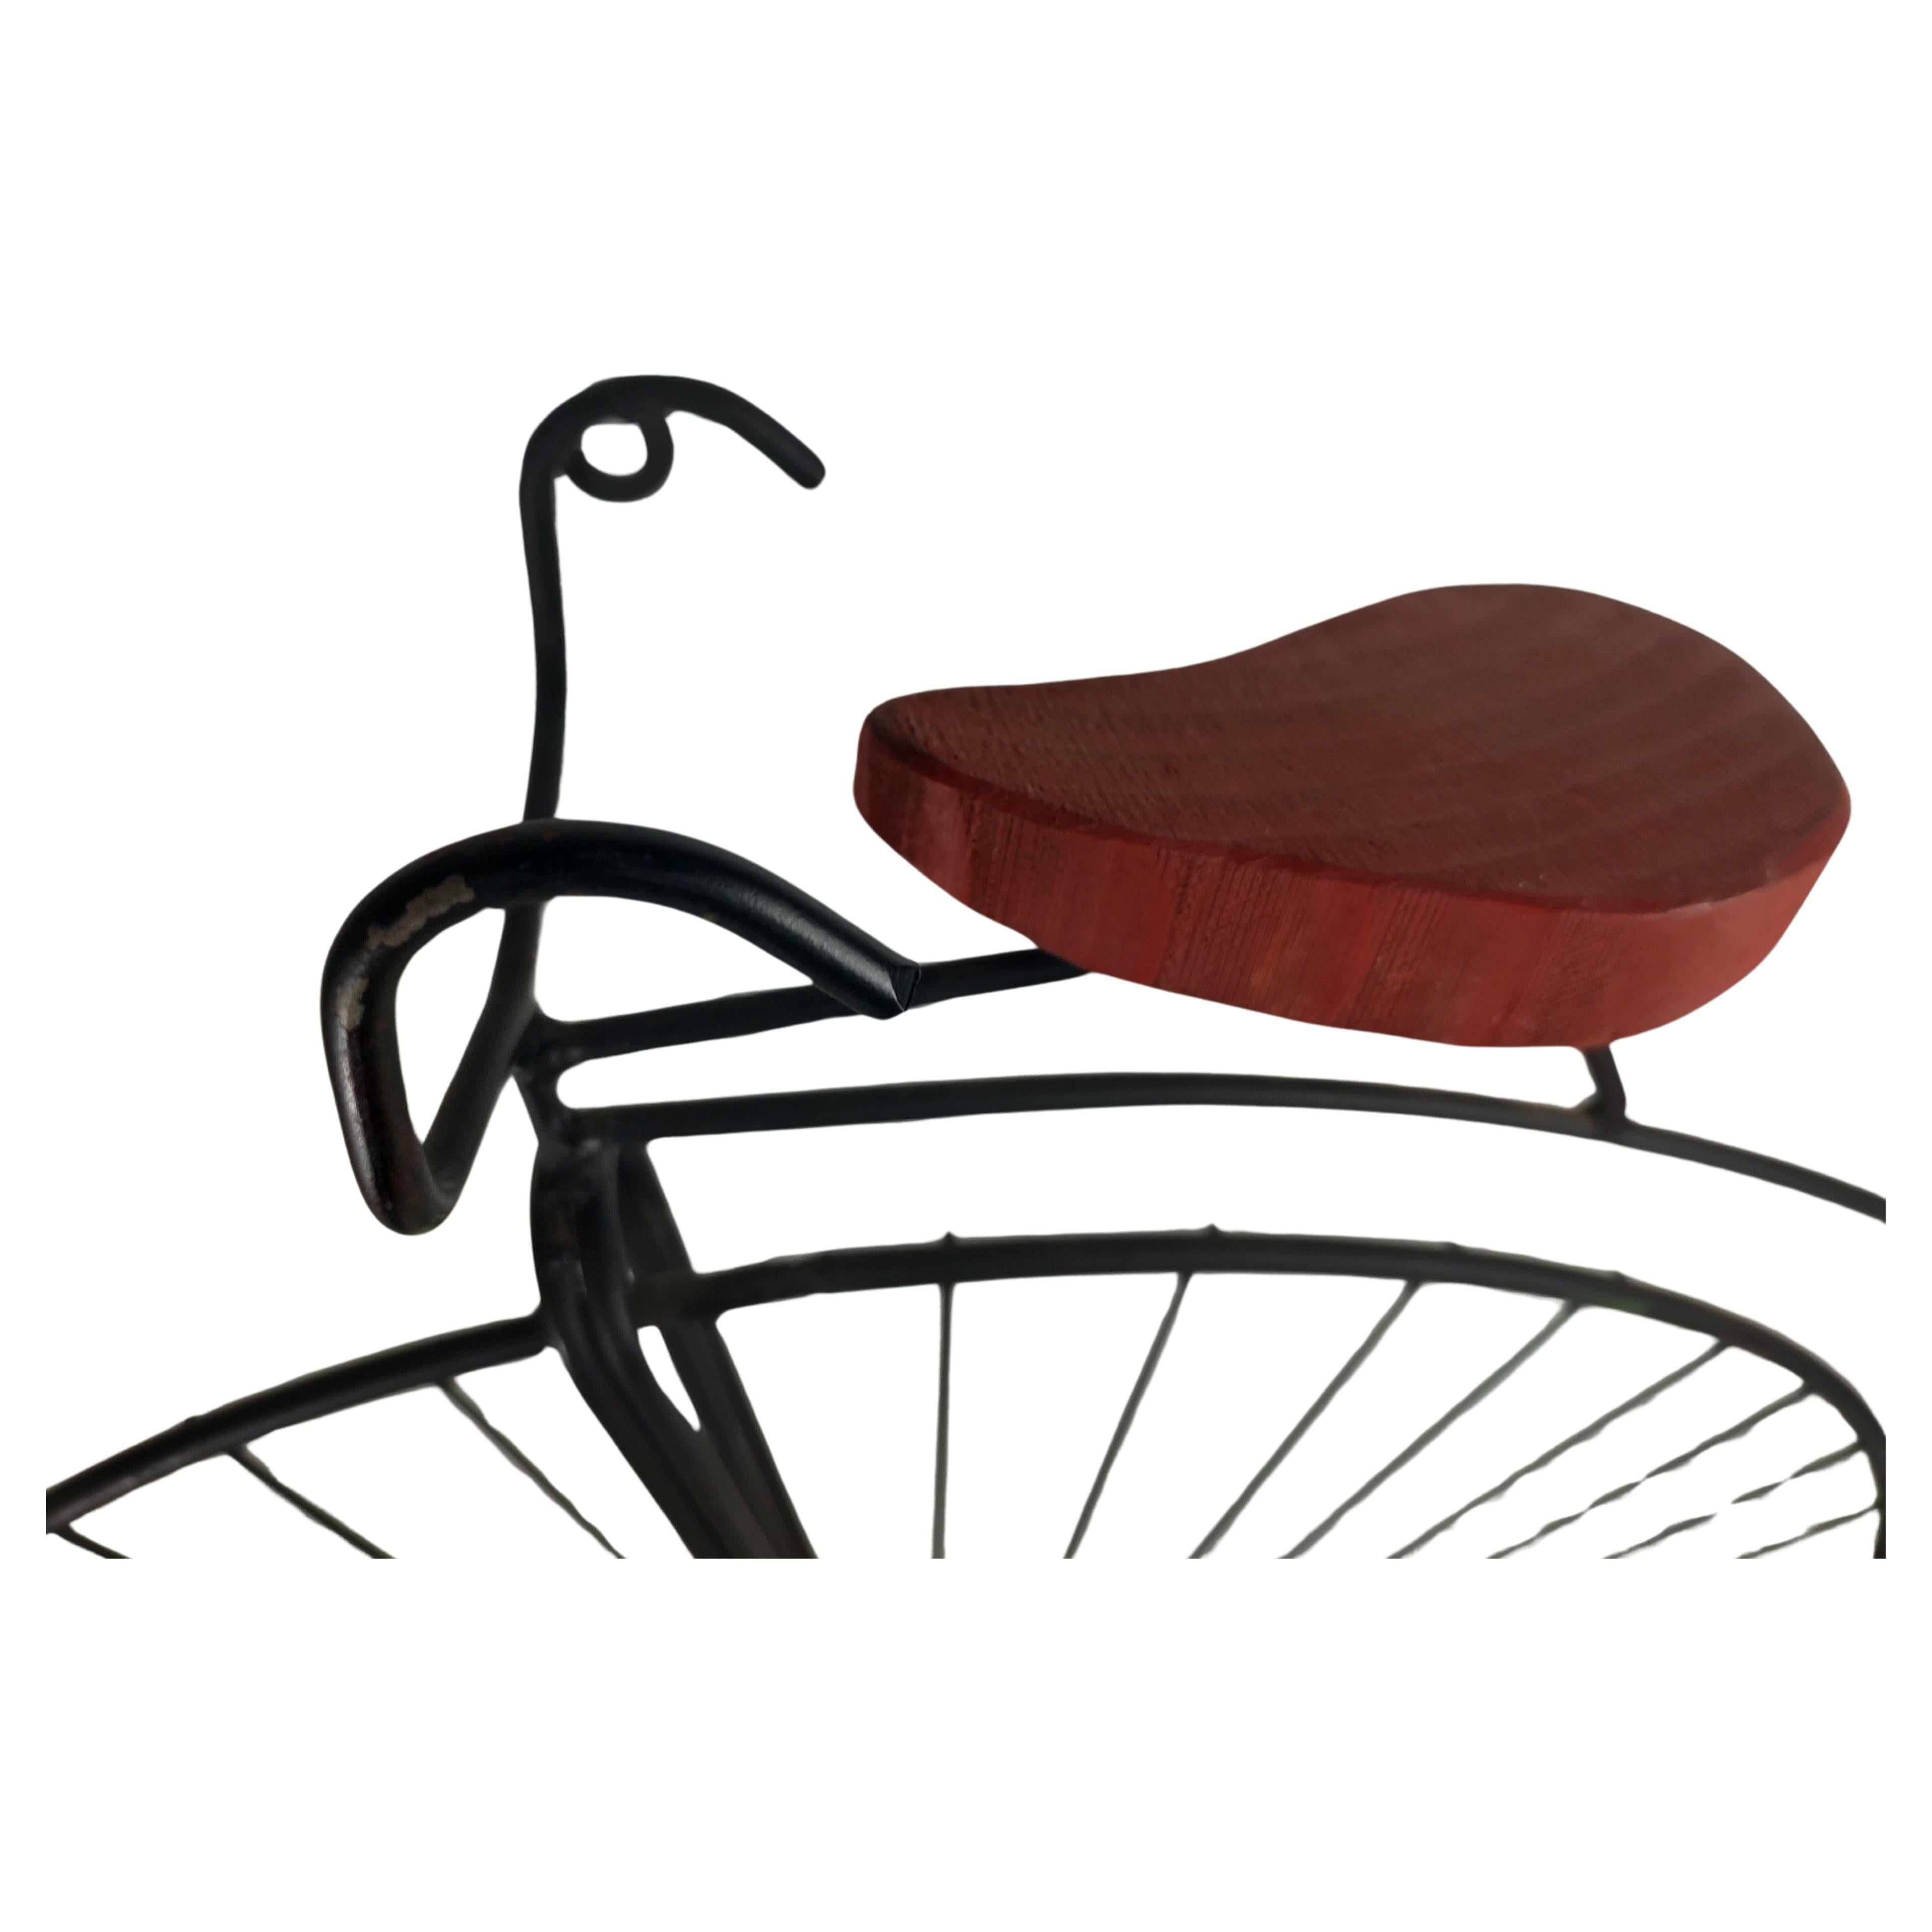 American Mid-Century Modern Sculptural Bicycle Tabletop or Wall Mount by Curtis Jere For Sale